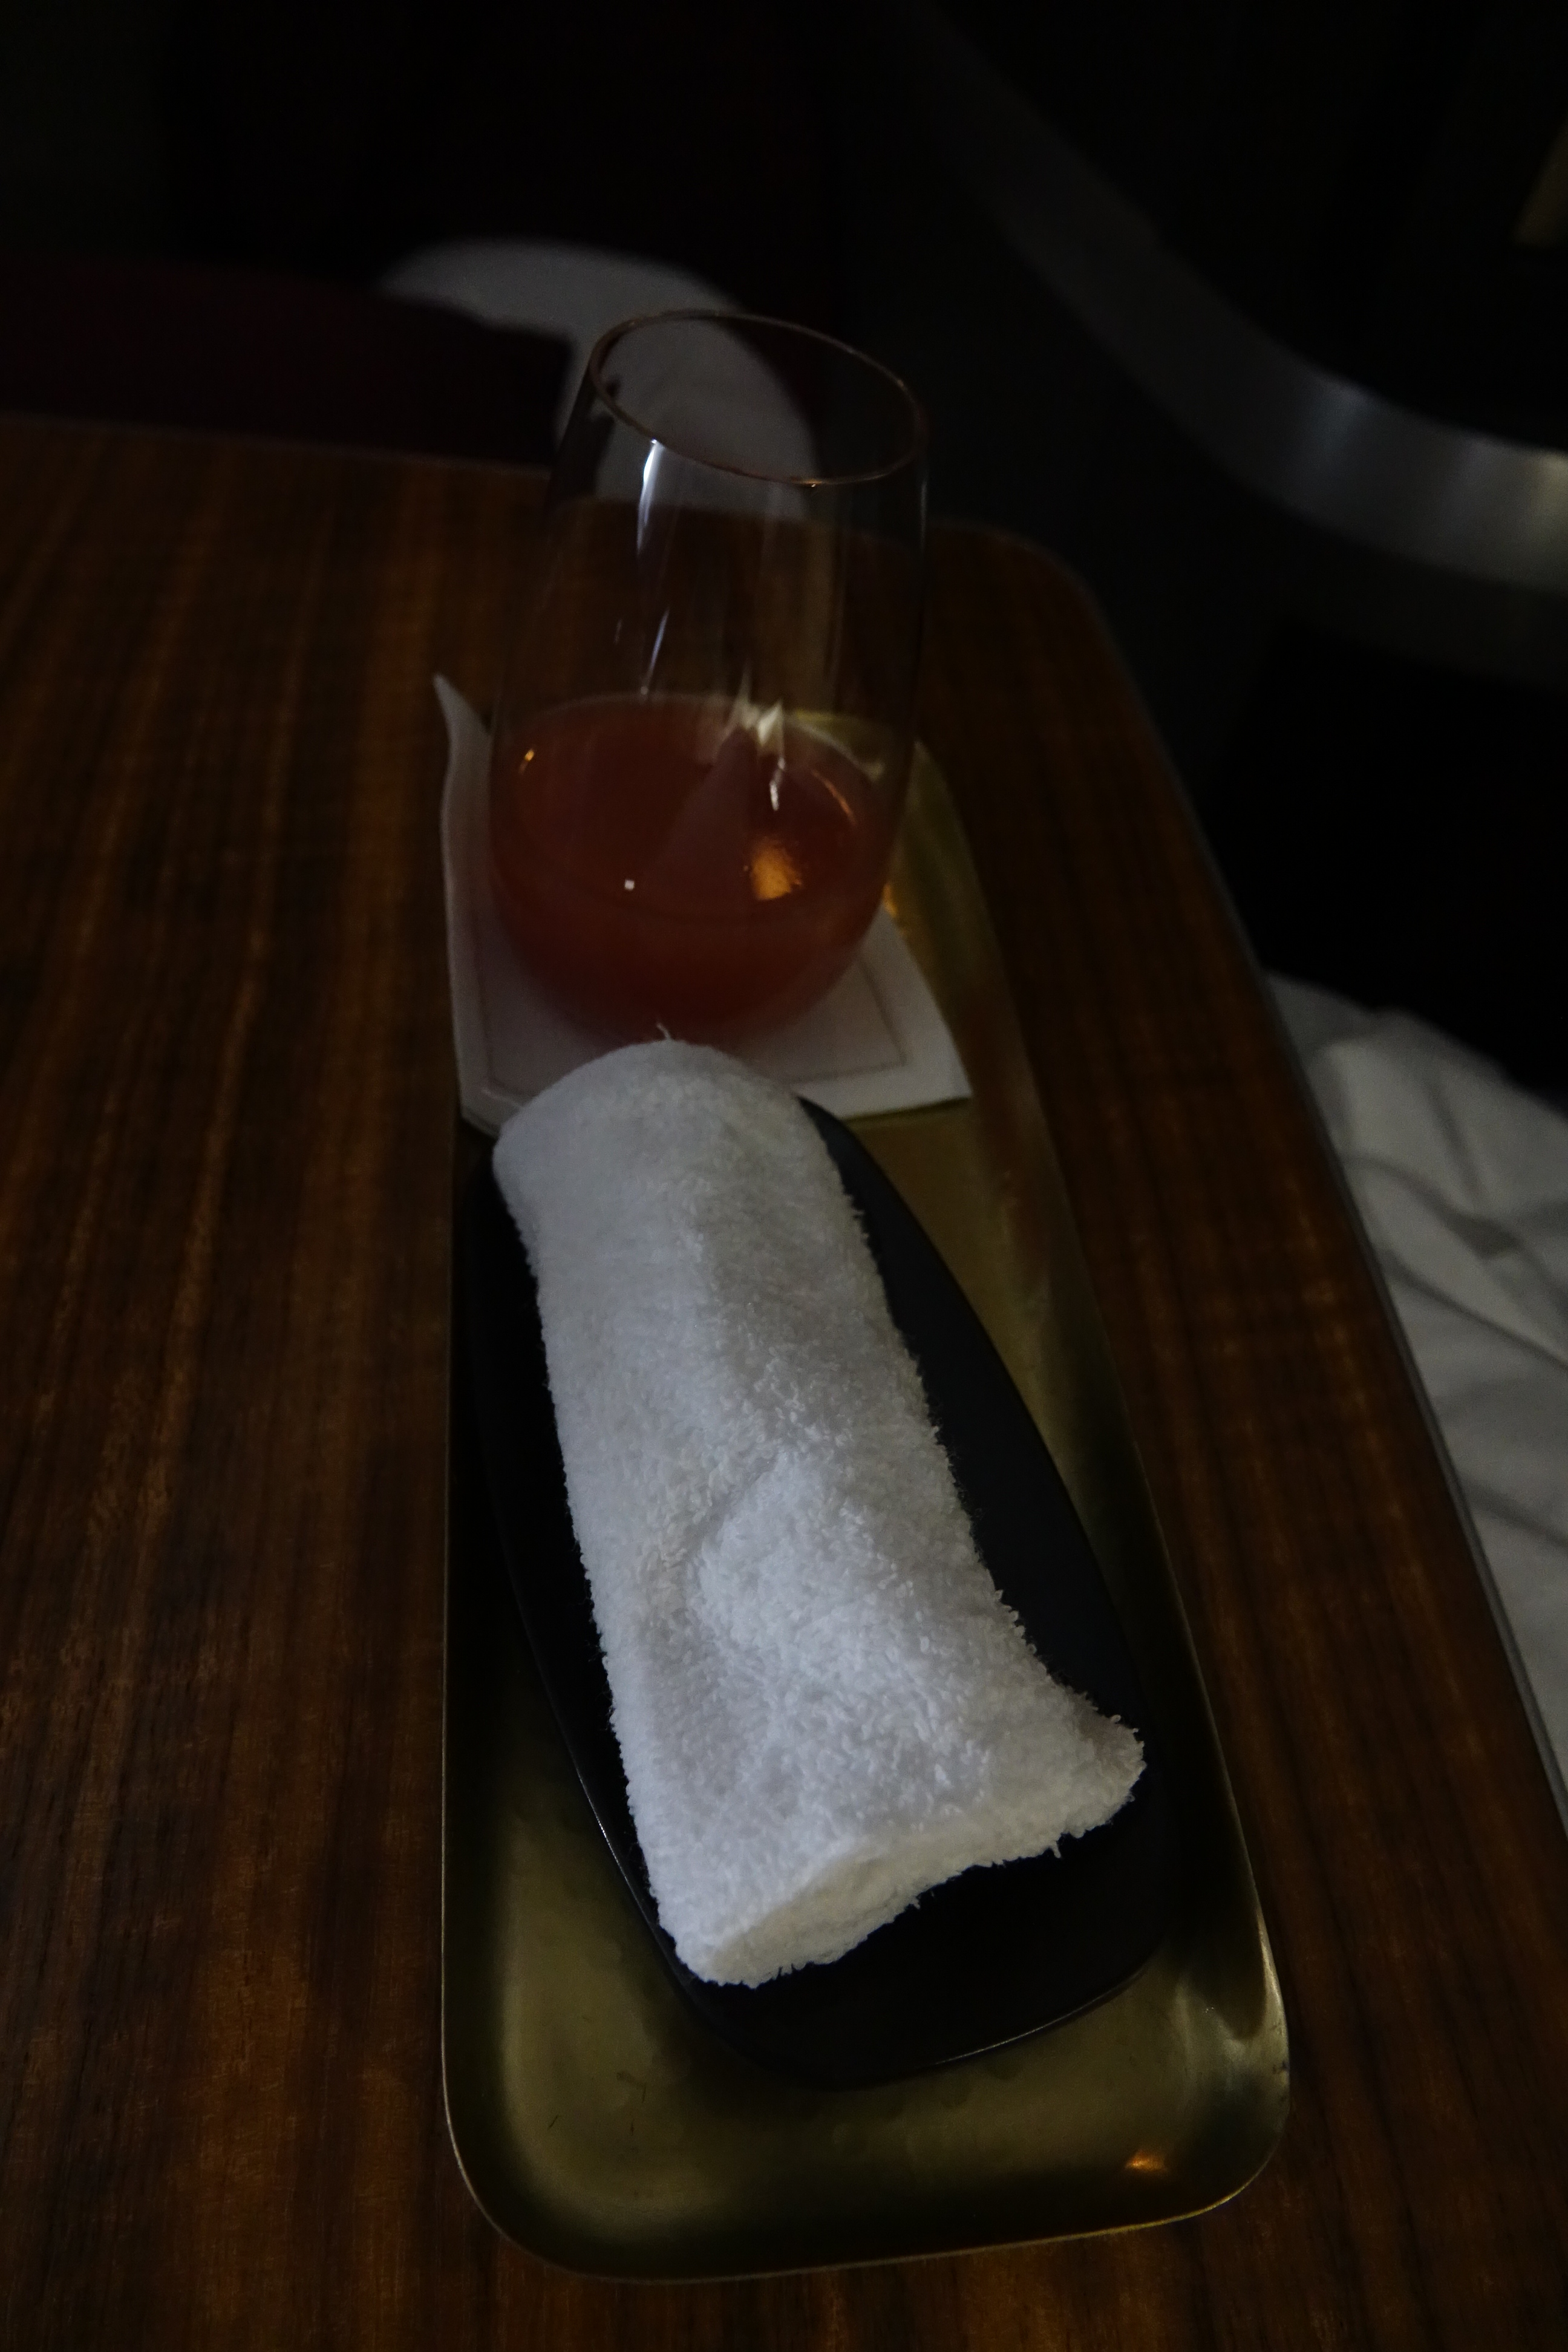 a towel and a glass of liquid on a tray